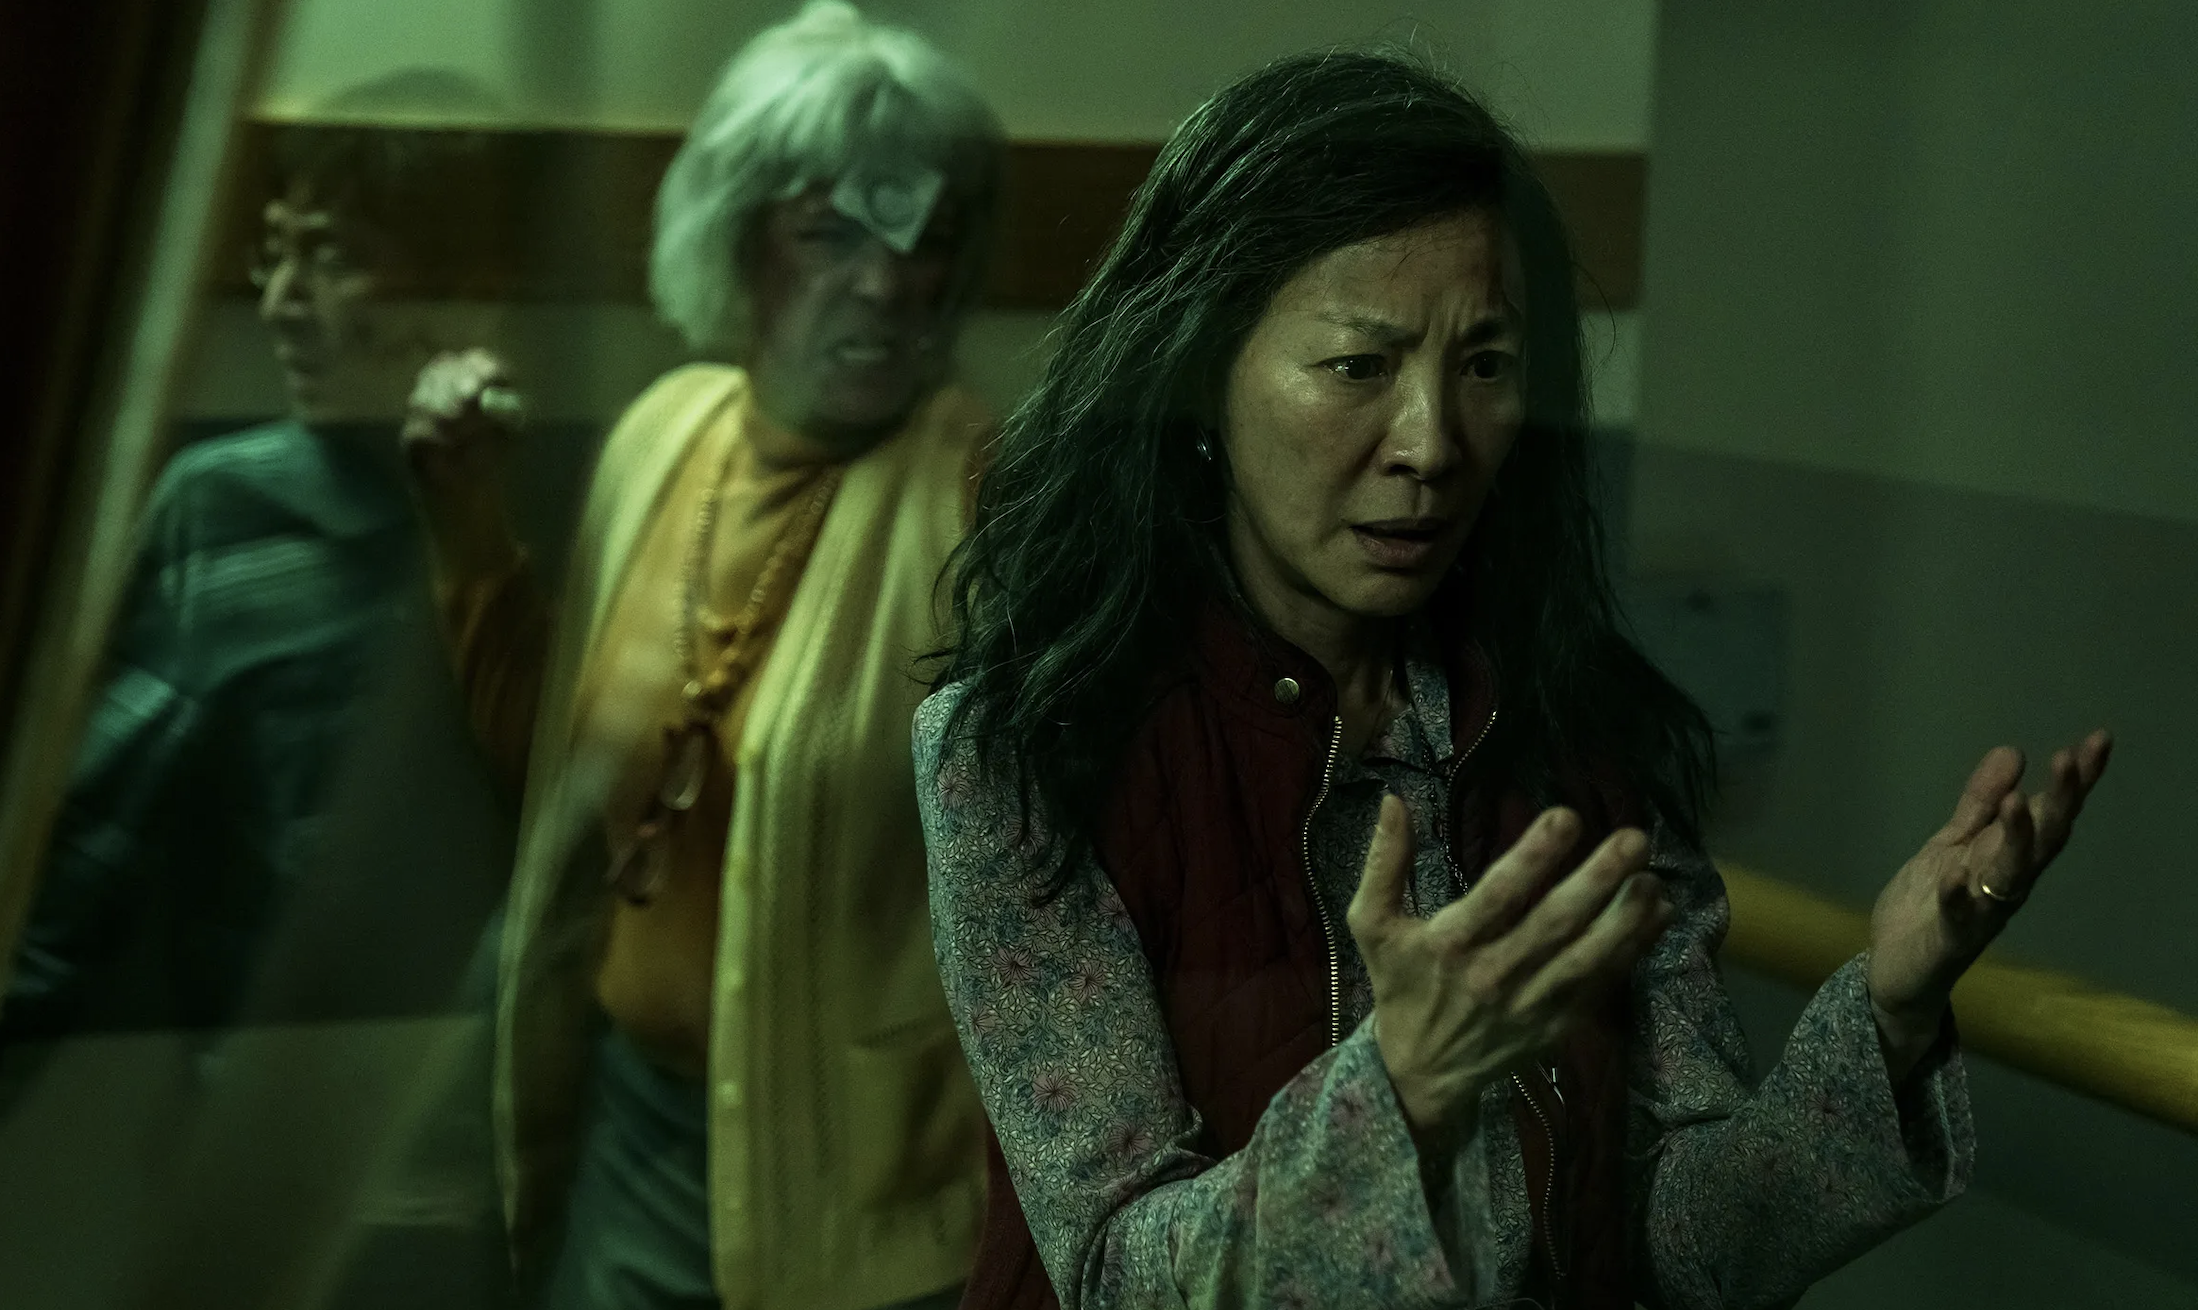 Michelle Yeoh as Evelyn with Jamie Lee Curtis as Deirdre running with a fist clenched behind her